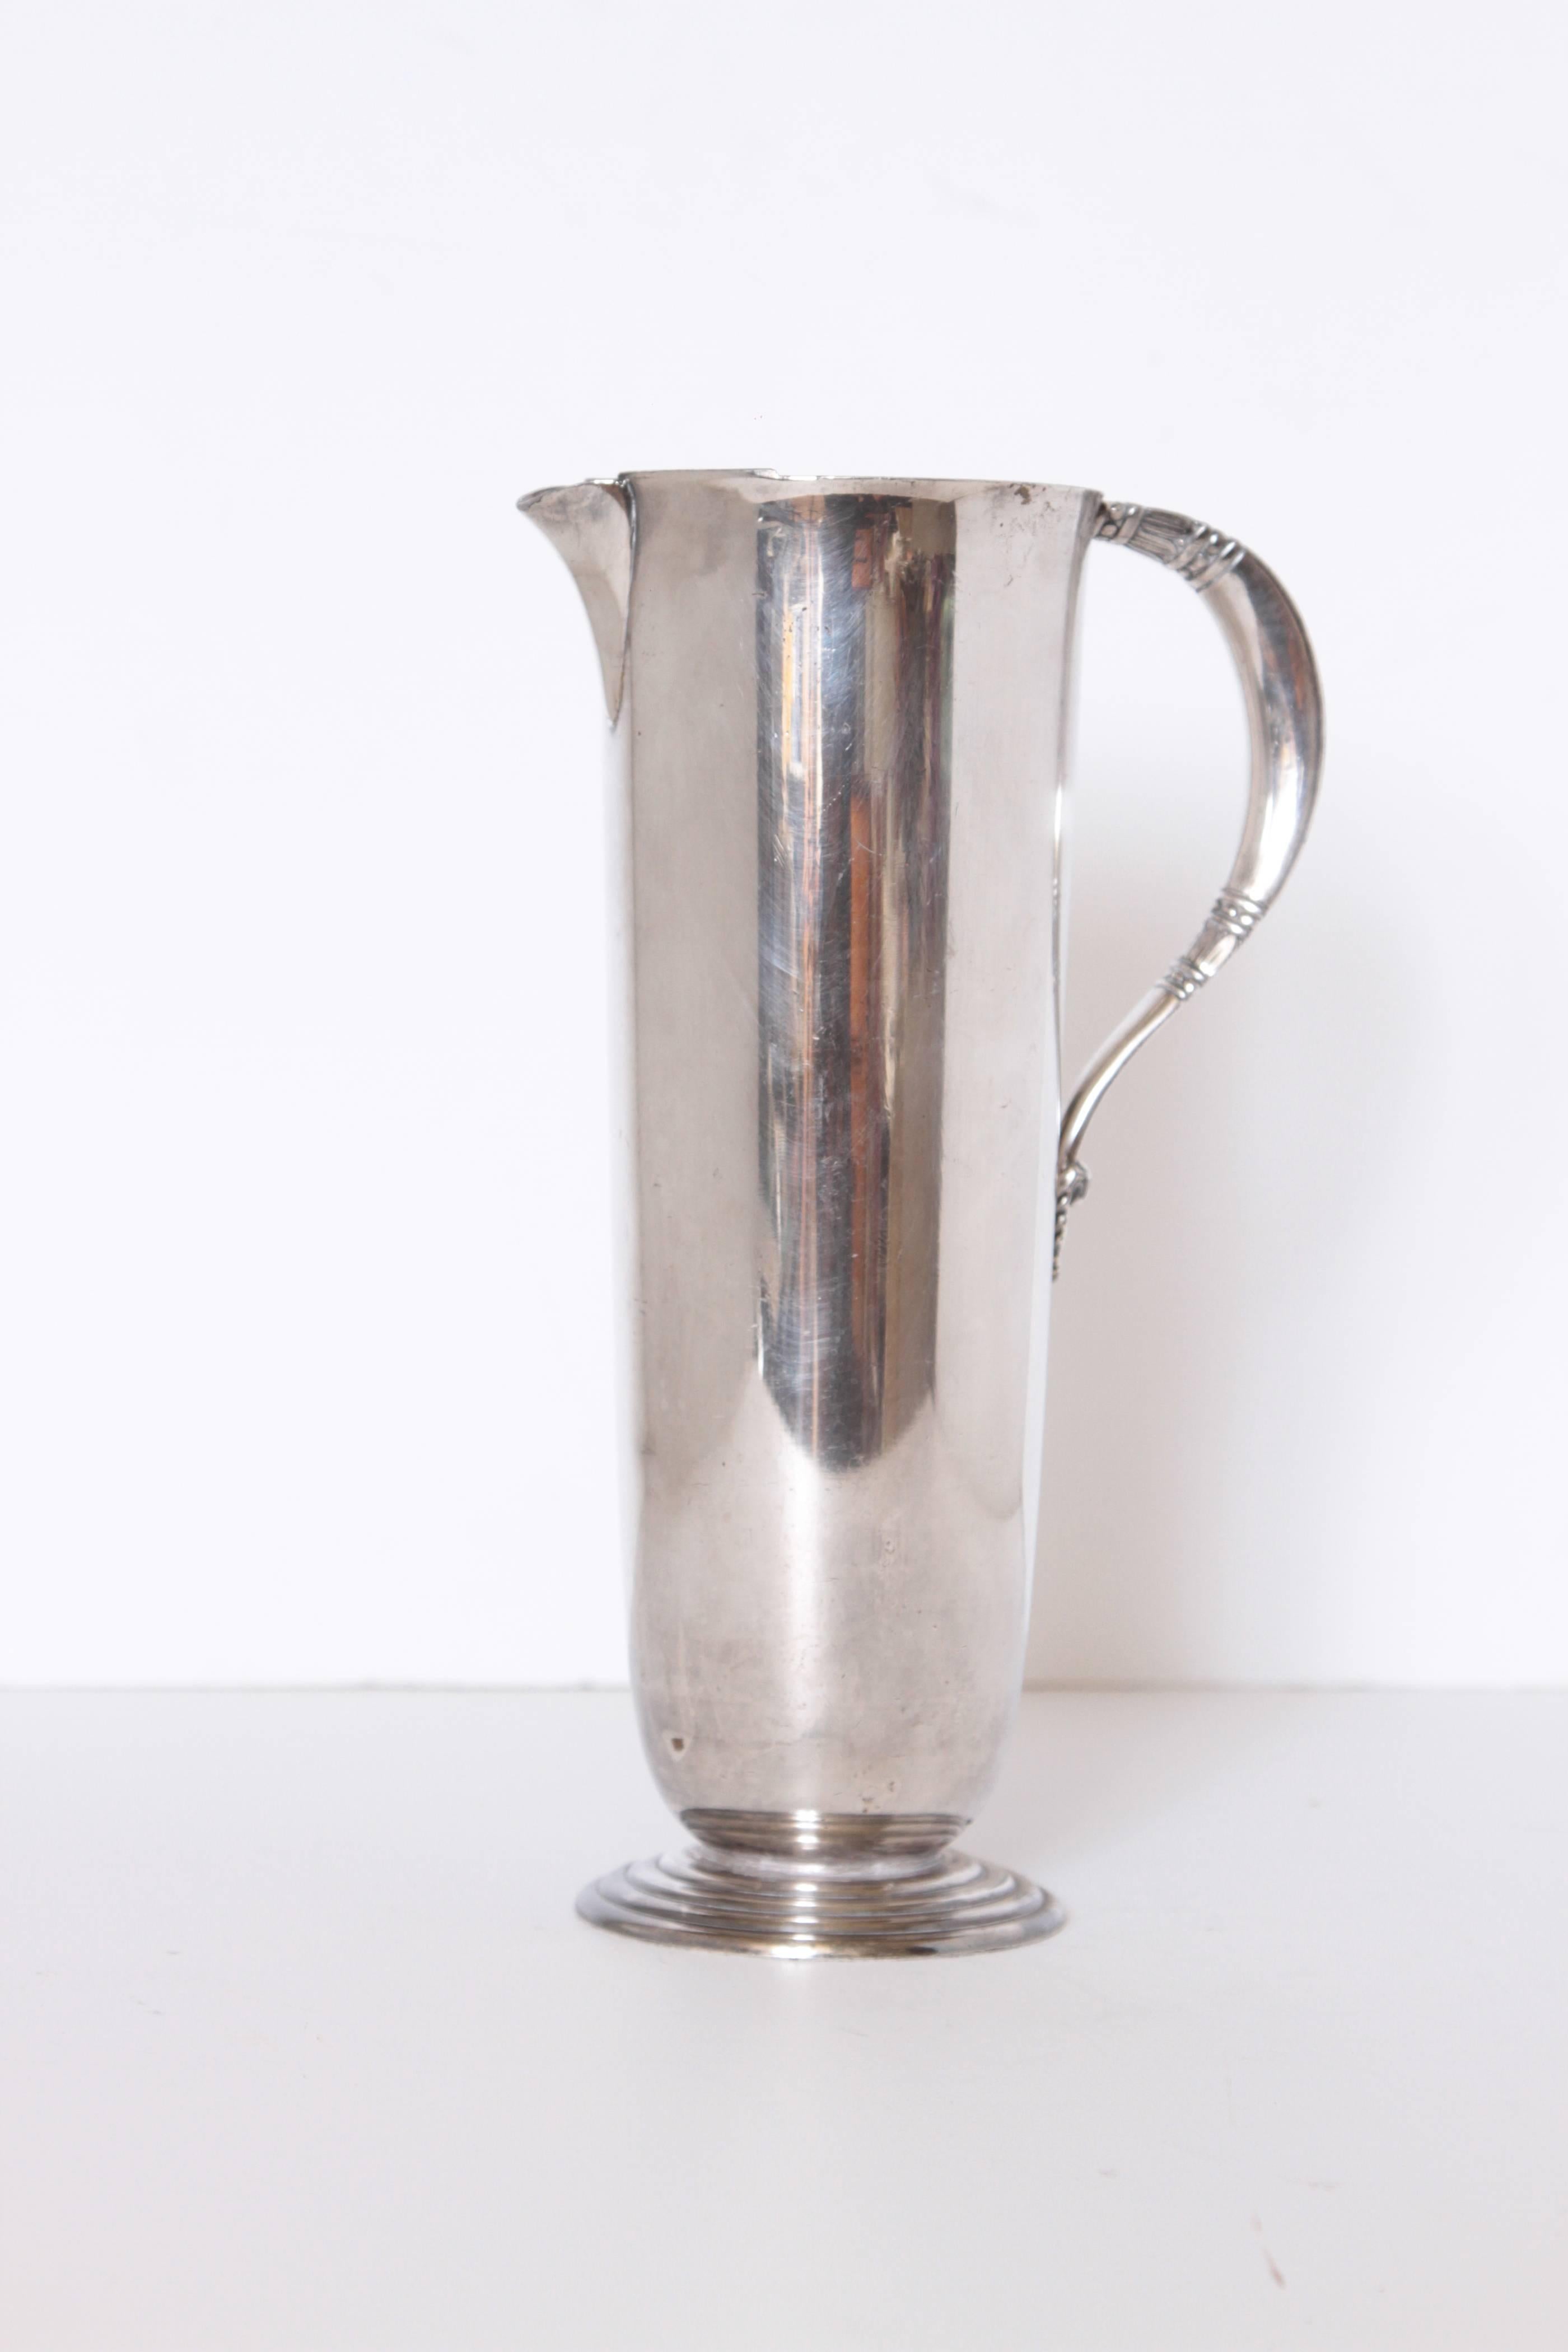 Modernist silver plate pitcher Carl Conrad Braun International silver tropical

Art deco machine age cocktail mixing pitcher by Braun for International in the Tropical pattern,
circa 1940. Signed.
Streamline stepped base and decorated